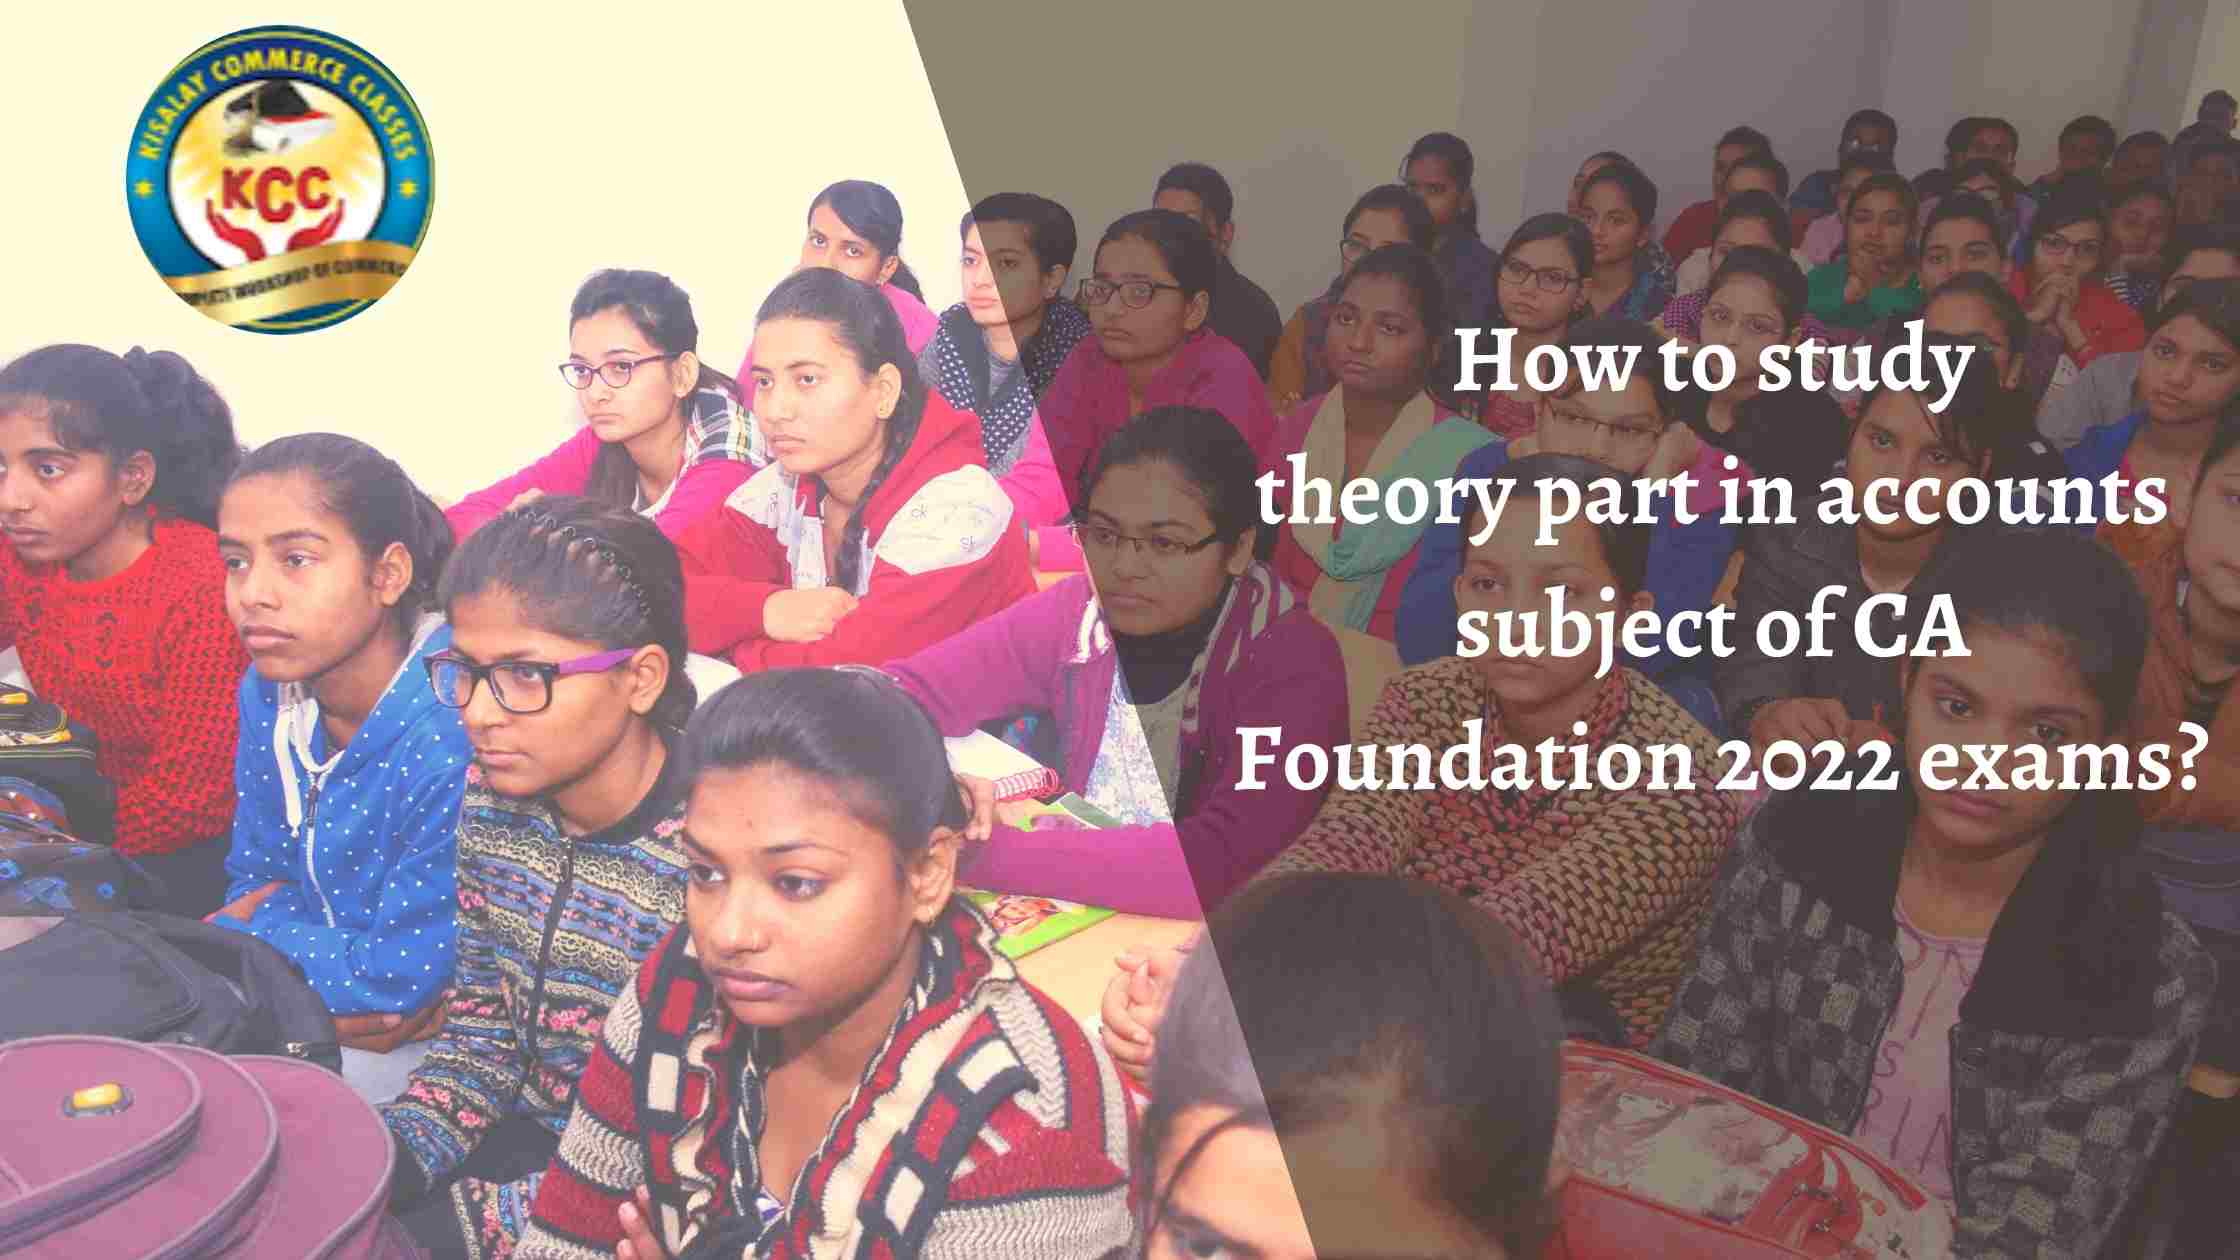 How to study theory part in accounts subject of CA Foundation 2022 exams?